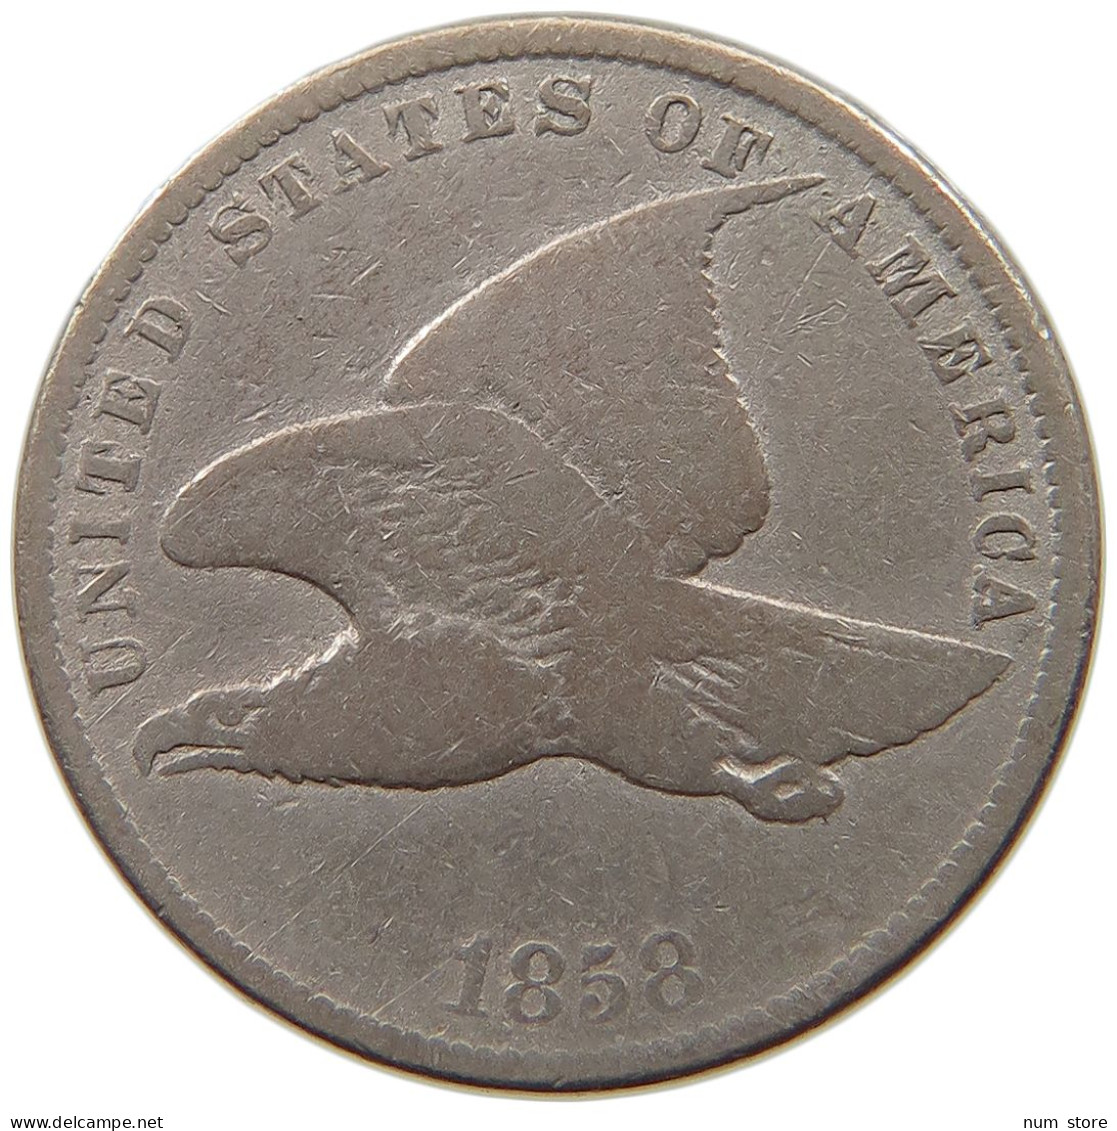 UNITED STATES OF AMERICA CENT 1858 FLYING EAGLE #a034 0887 - 1856-1858: Flying Eagle (Aquila Volante)